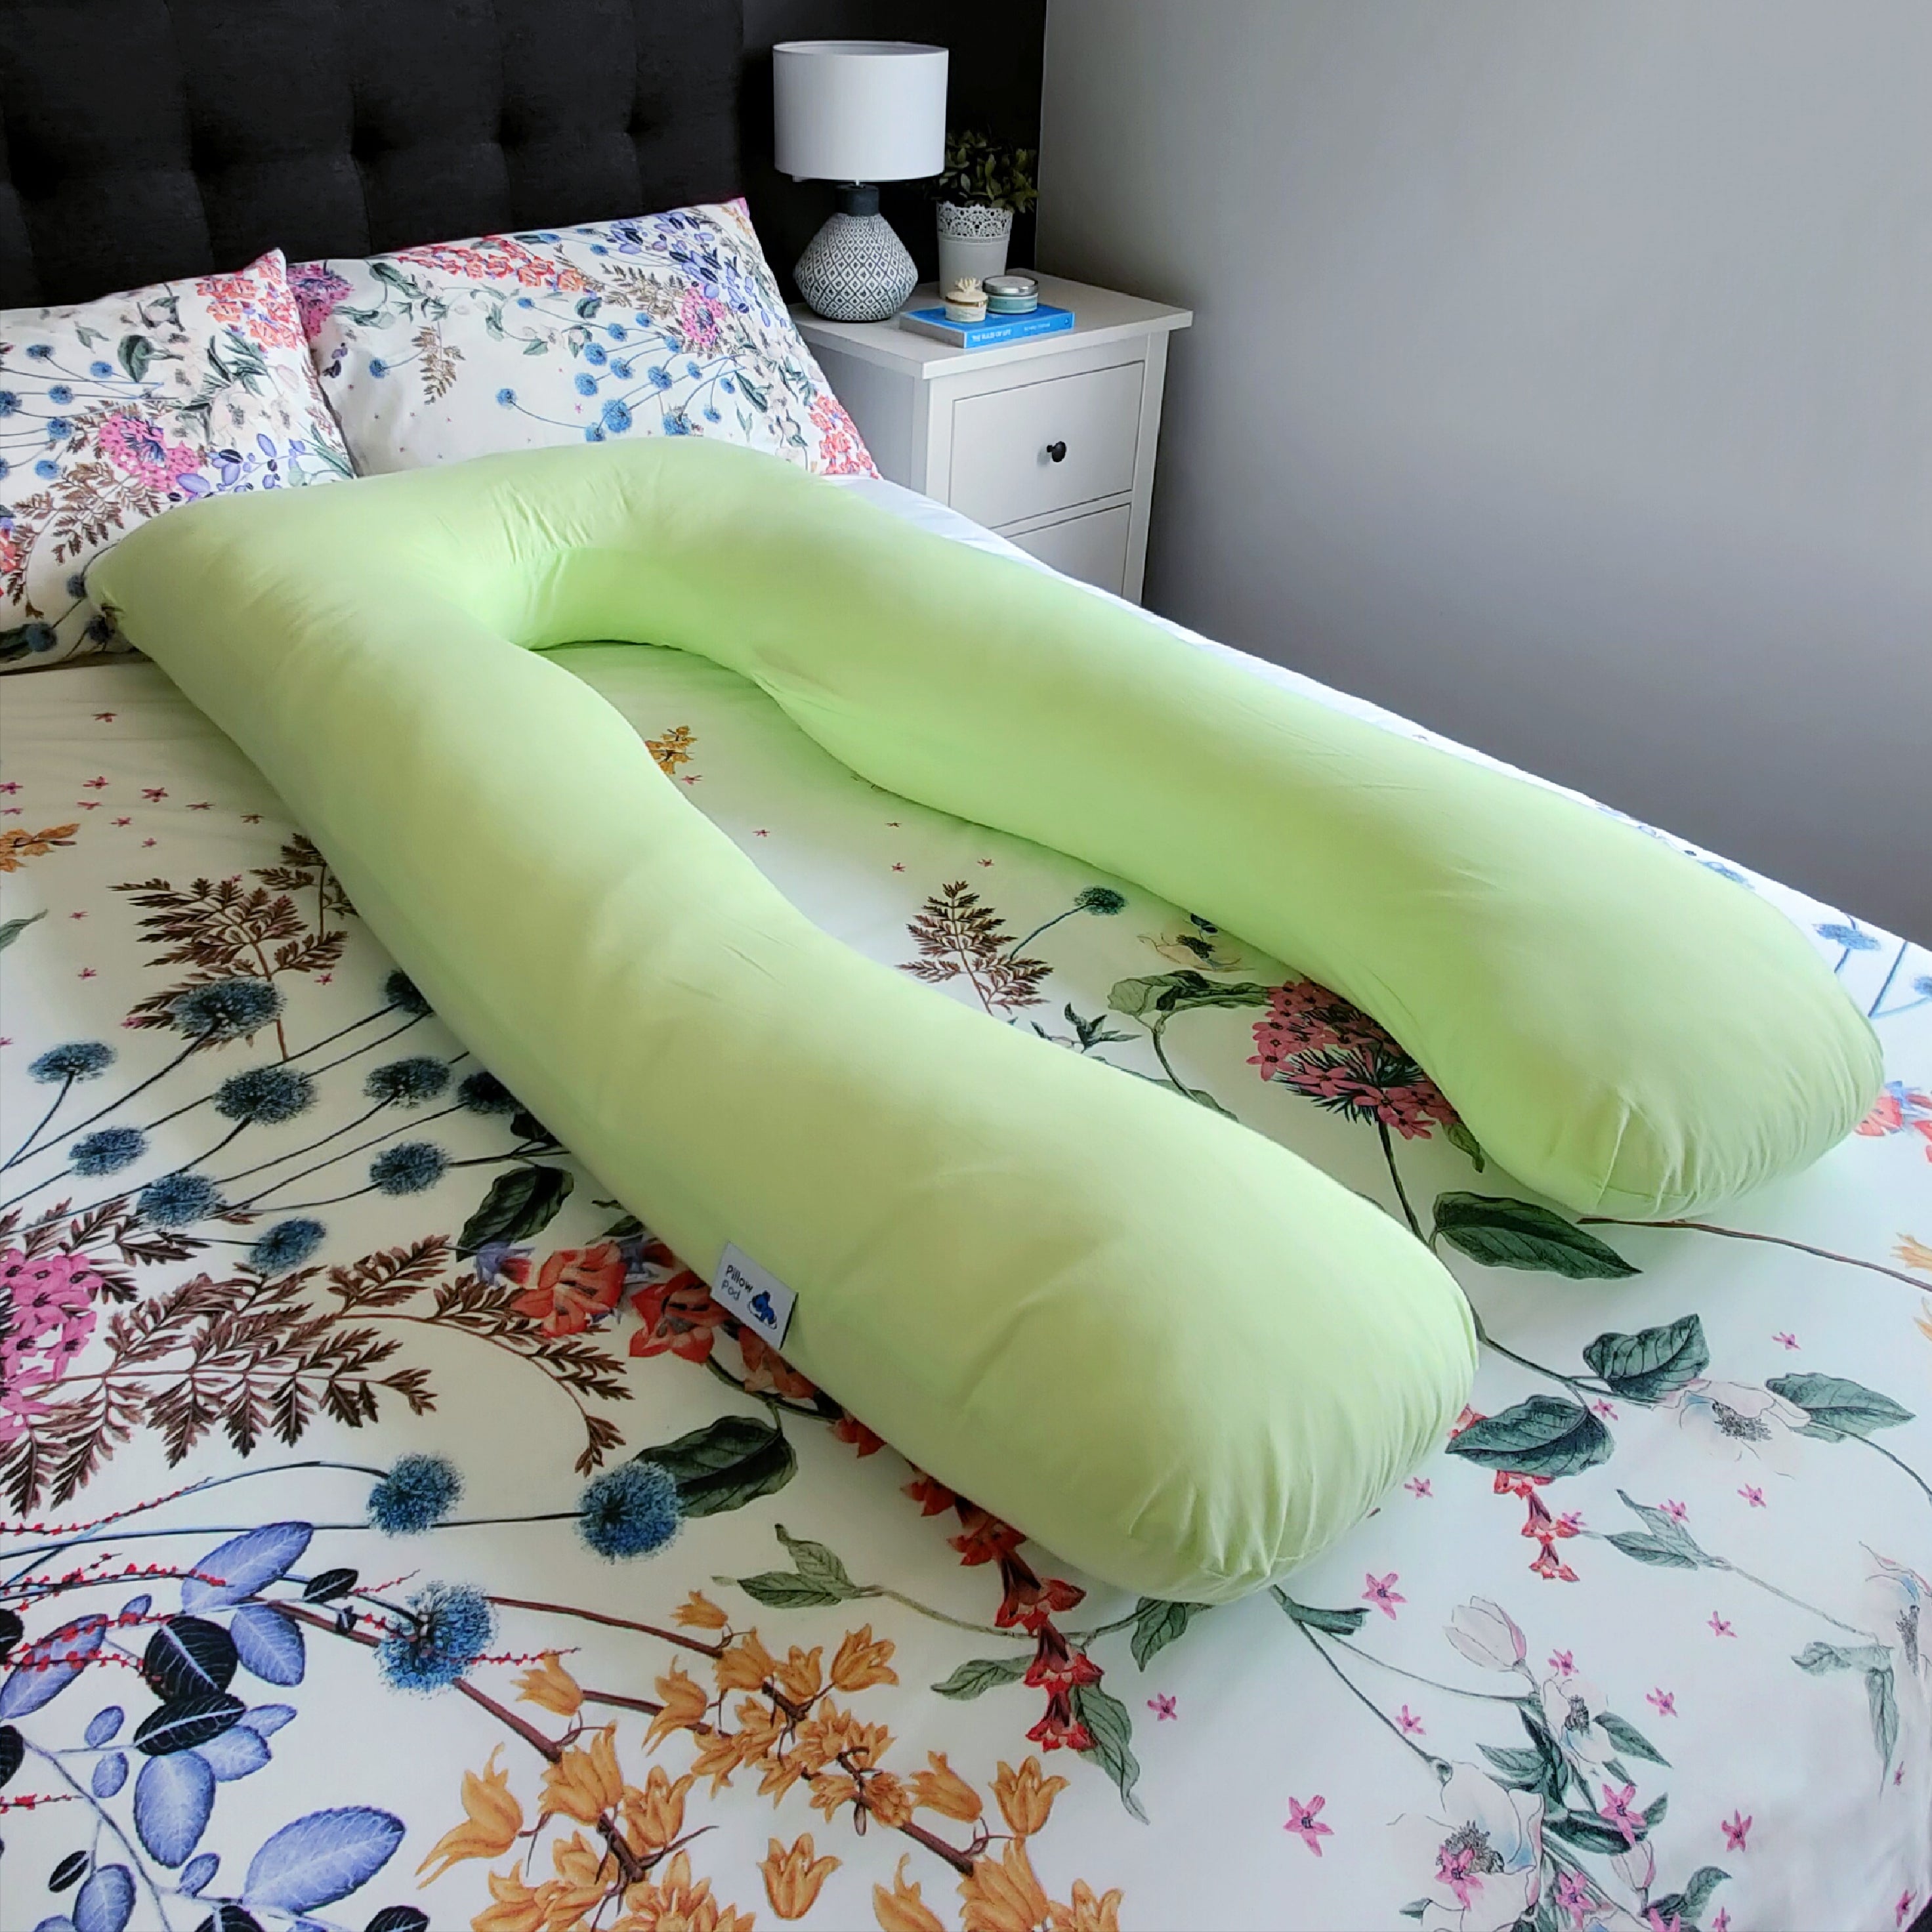 Mint Pillow Pod Full Body Support Pillow on Bed, with Flowery Bed Spread